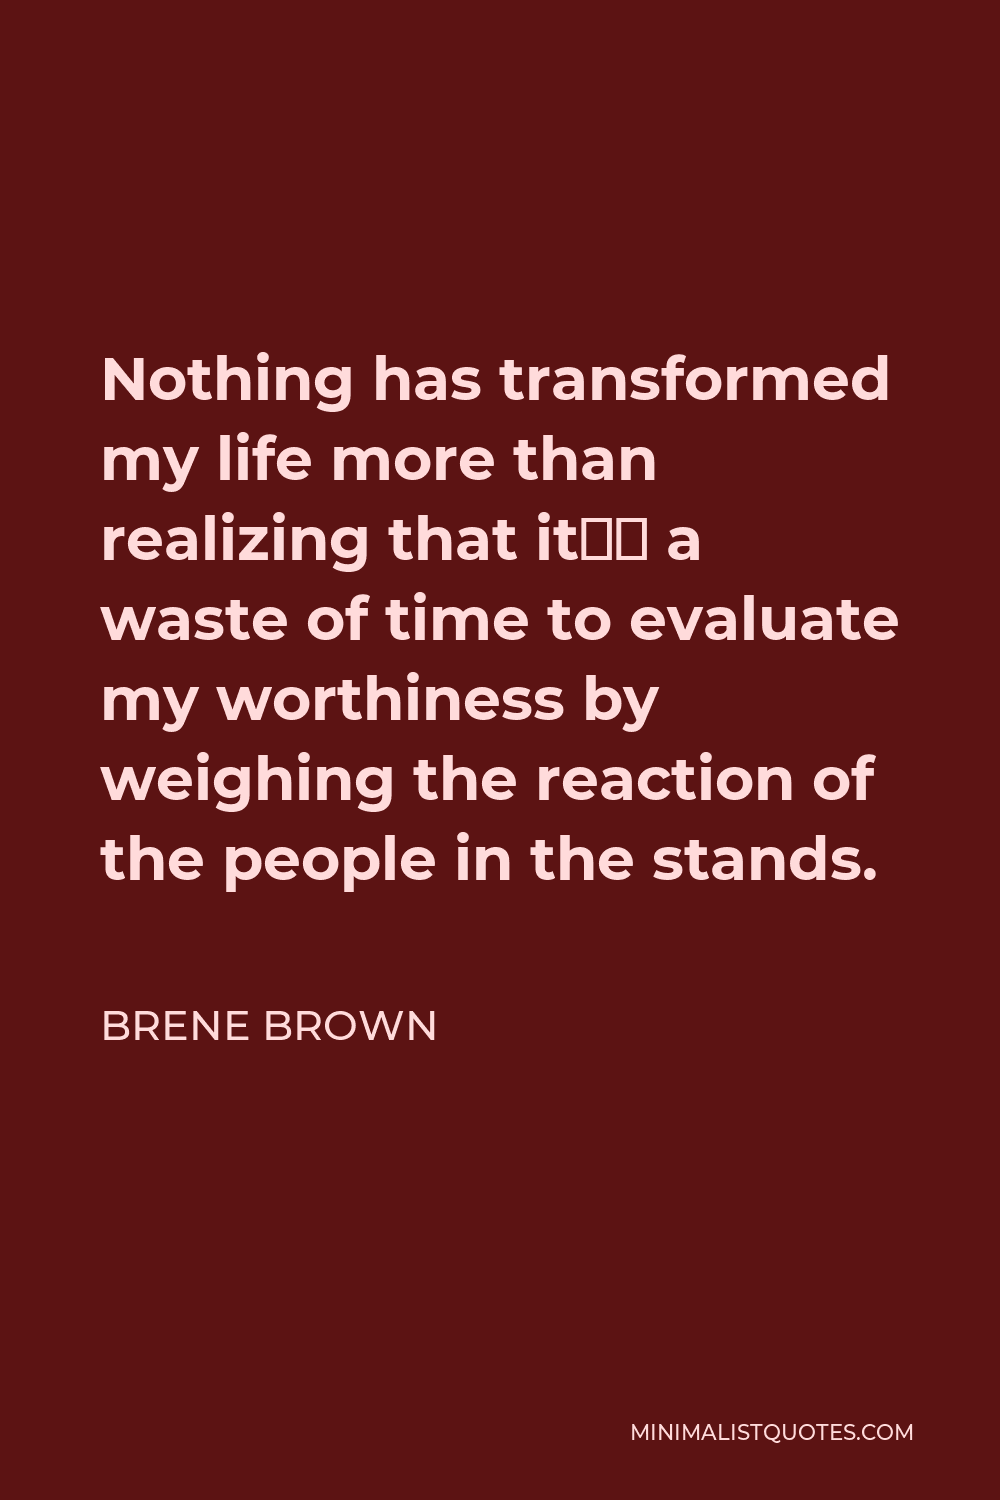 Brene Brown Quote - Nothing has transformed my life more than realizing that it’s a waste of time to evaluate my worthiness by weighing the reaction of the people in the stands.